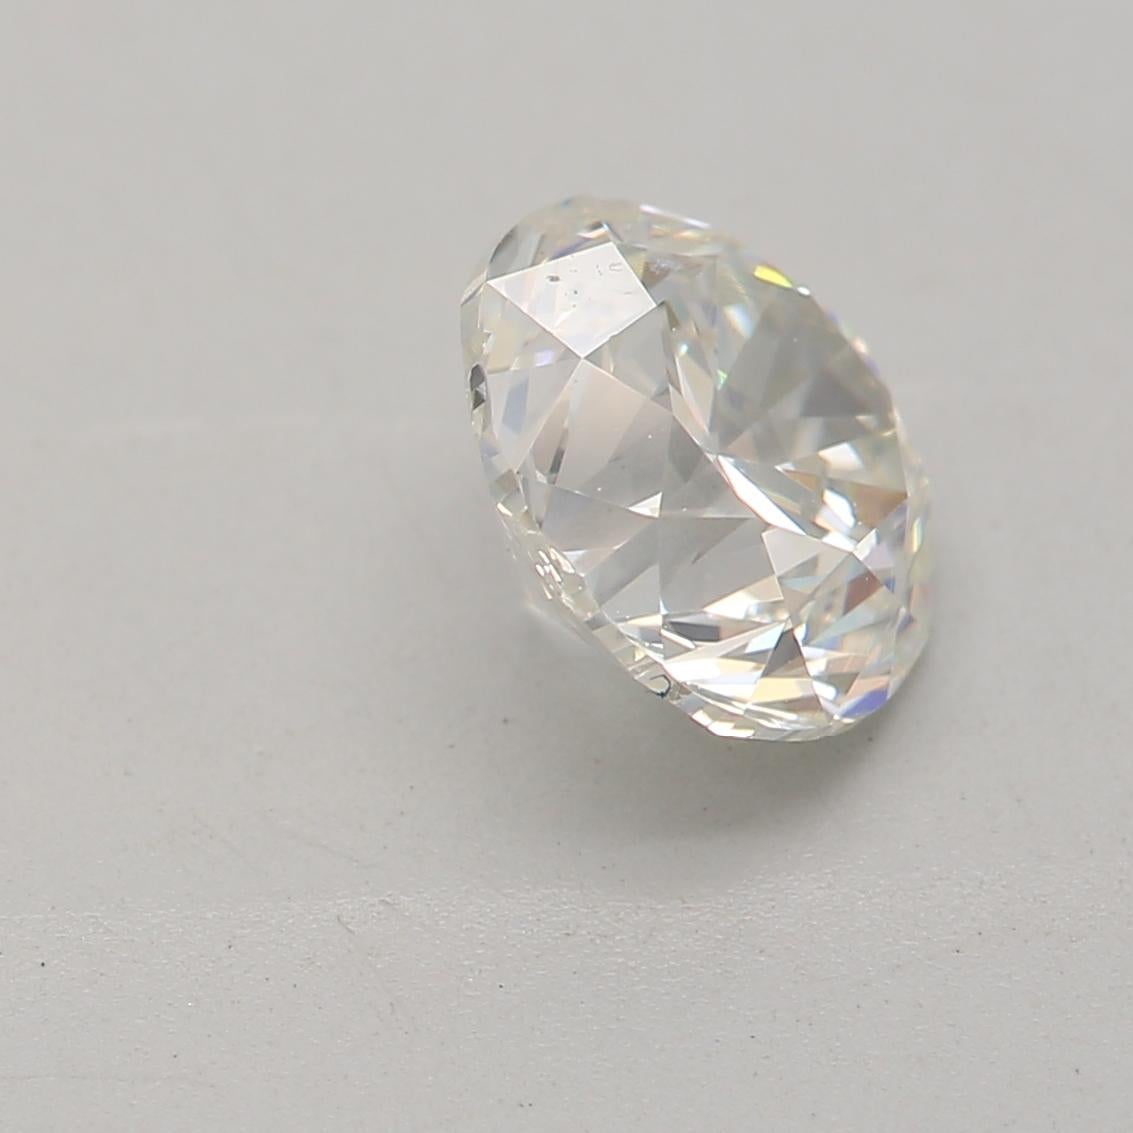 1.00 Carat Round Cut Diamond VS2 Clarity GIA Certified For Sale 1